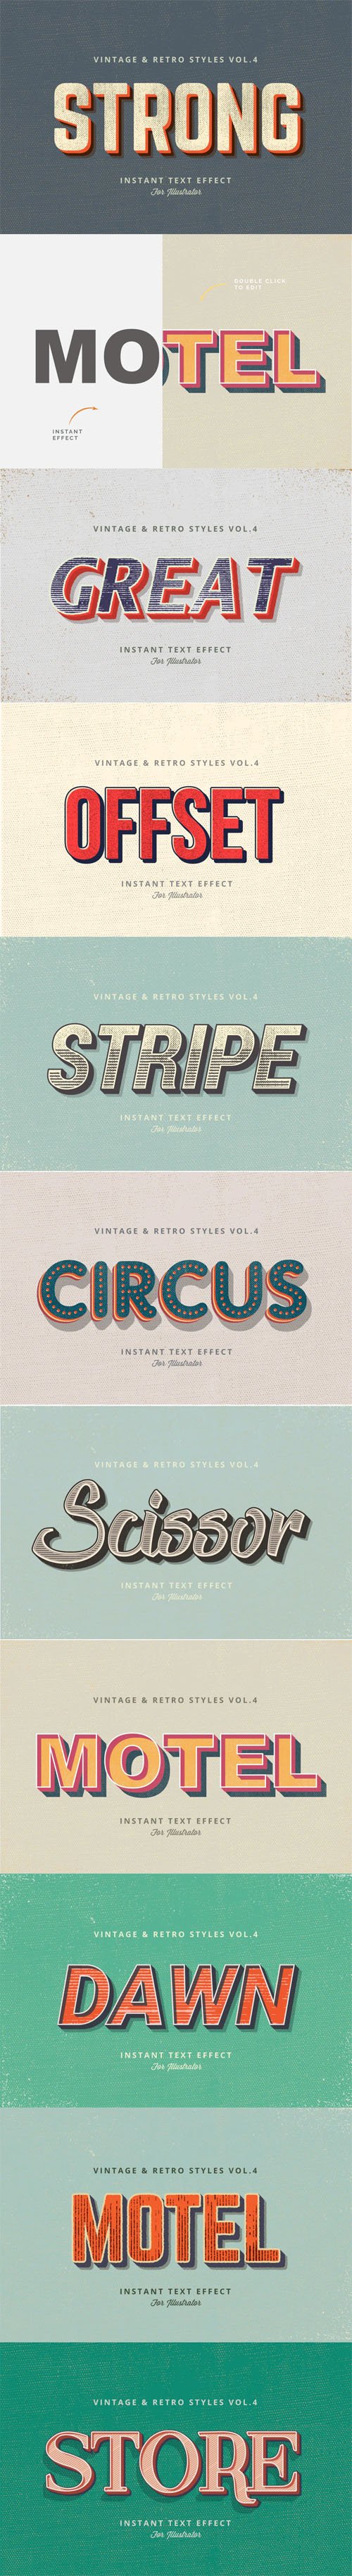 Vintage and Retro Graphic Styles Vol.4 for Adobe Illustrator